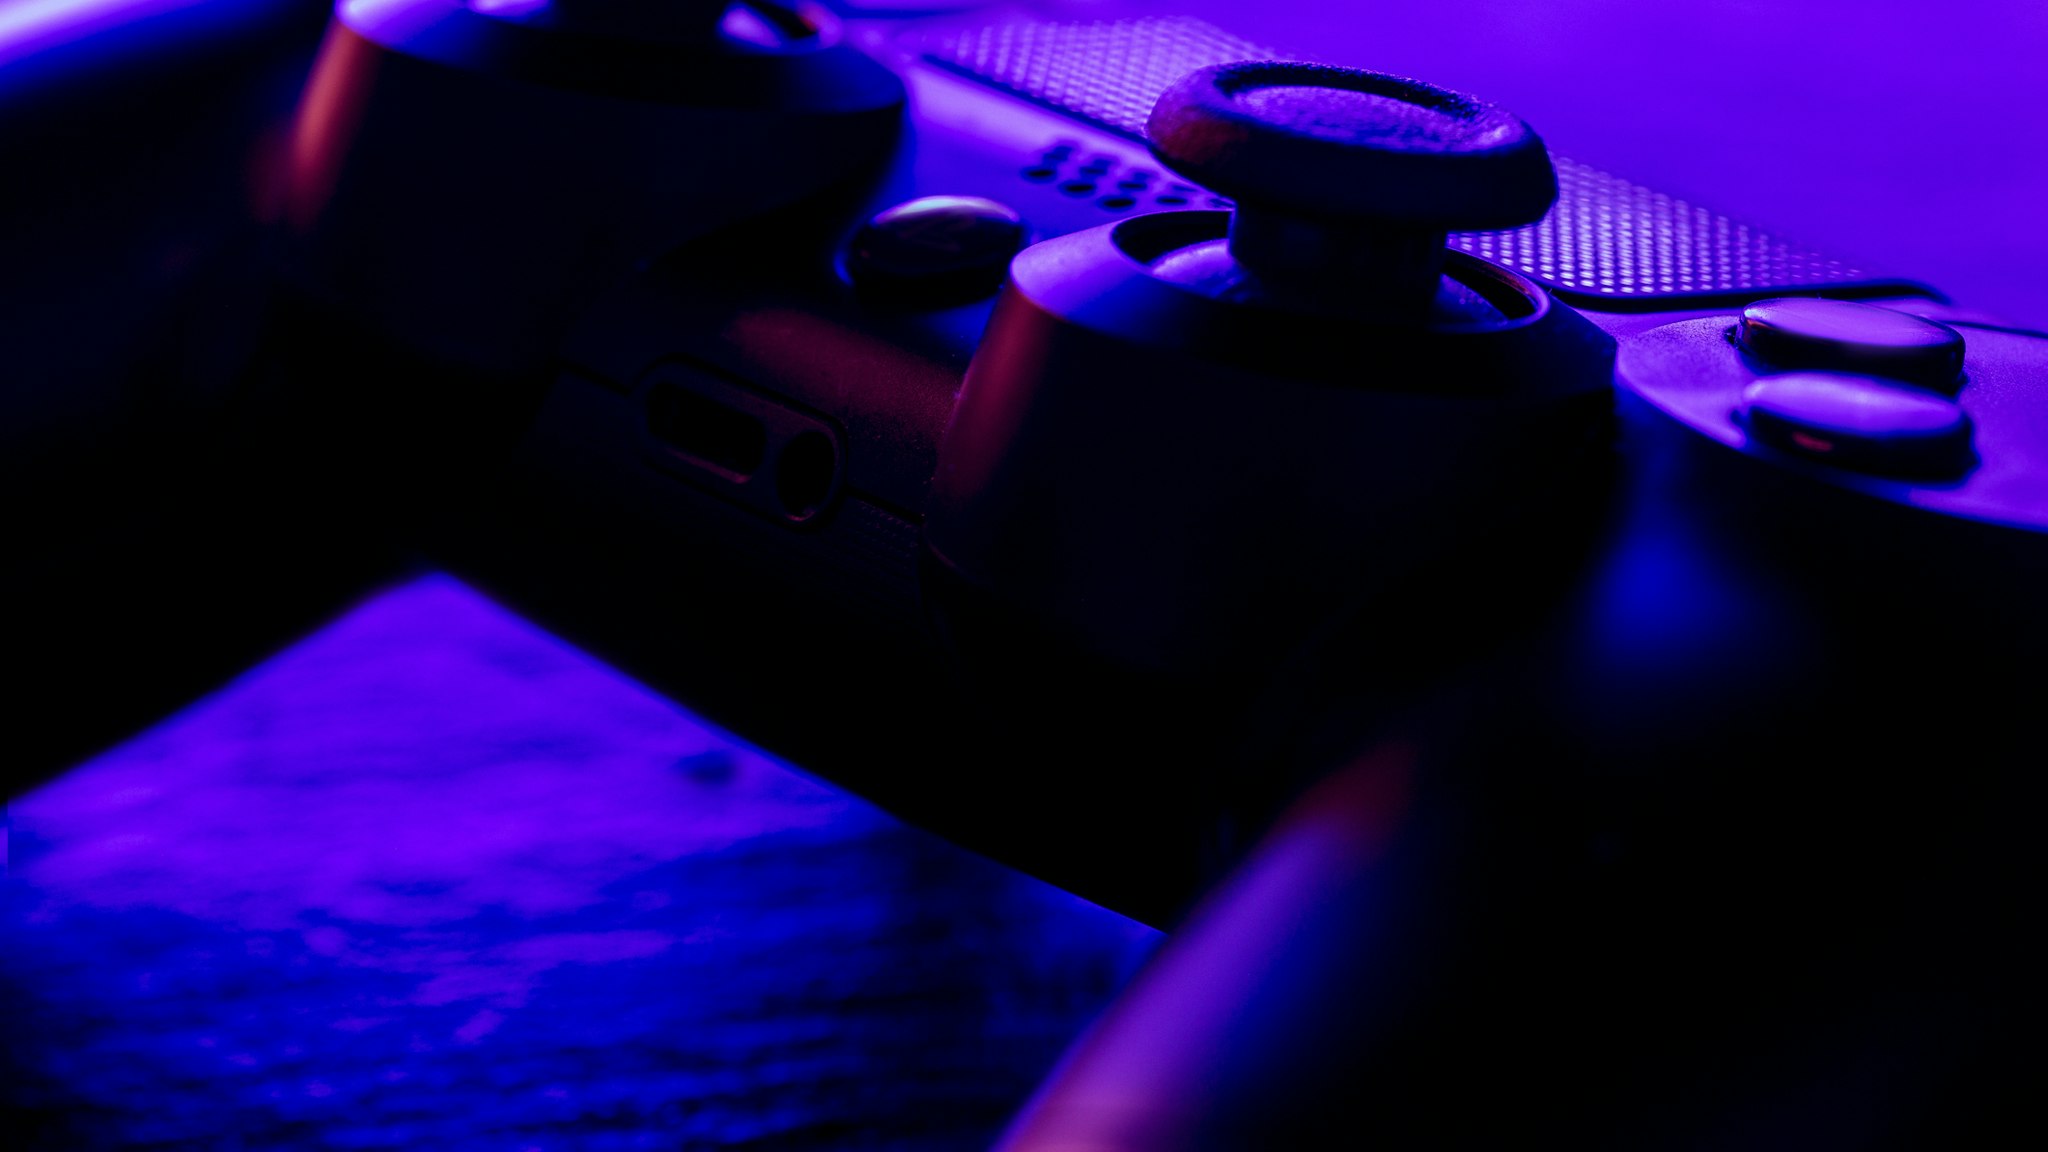 Close-Up Of Game Controller On Table - stock photo